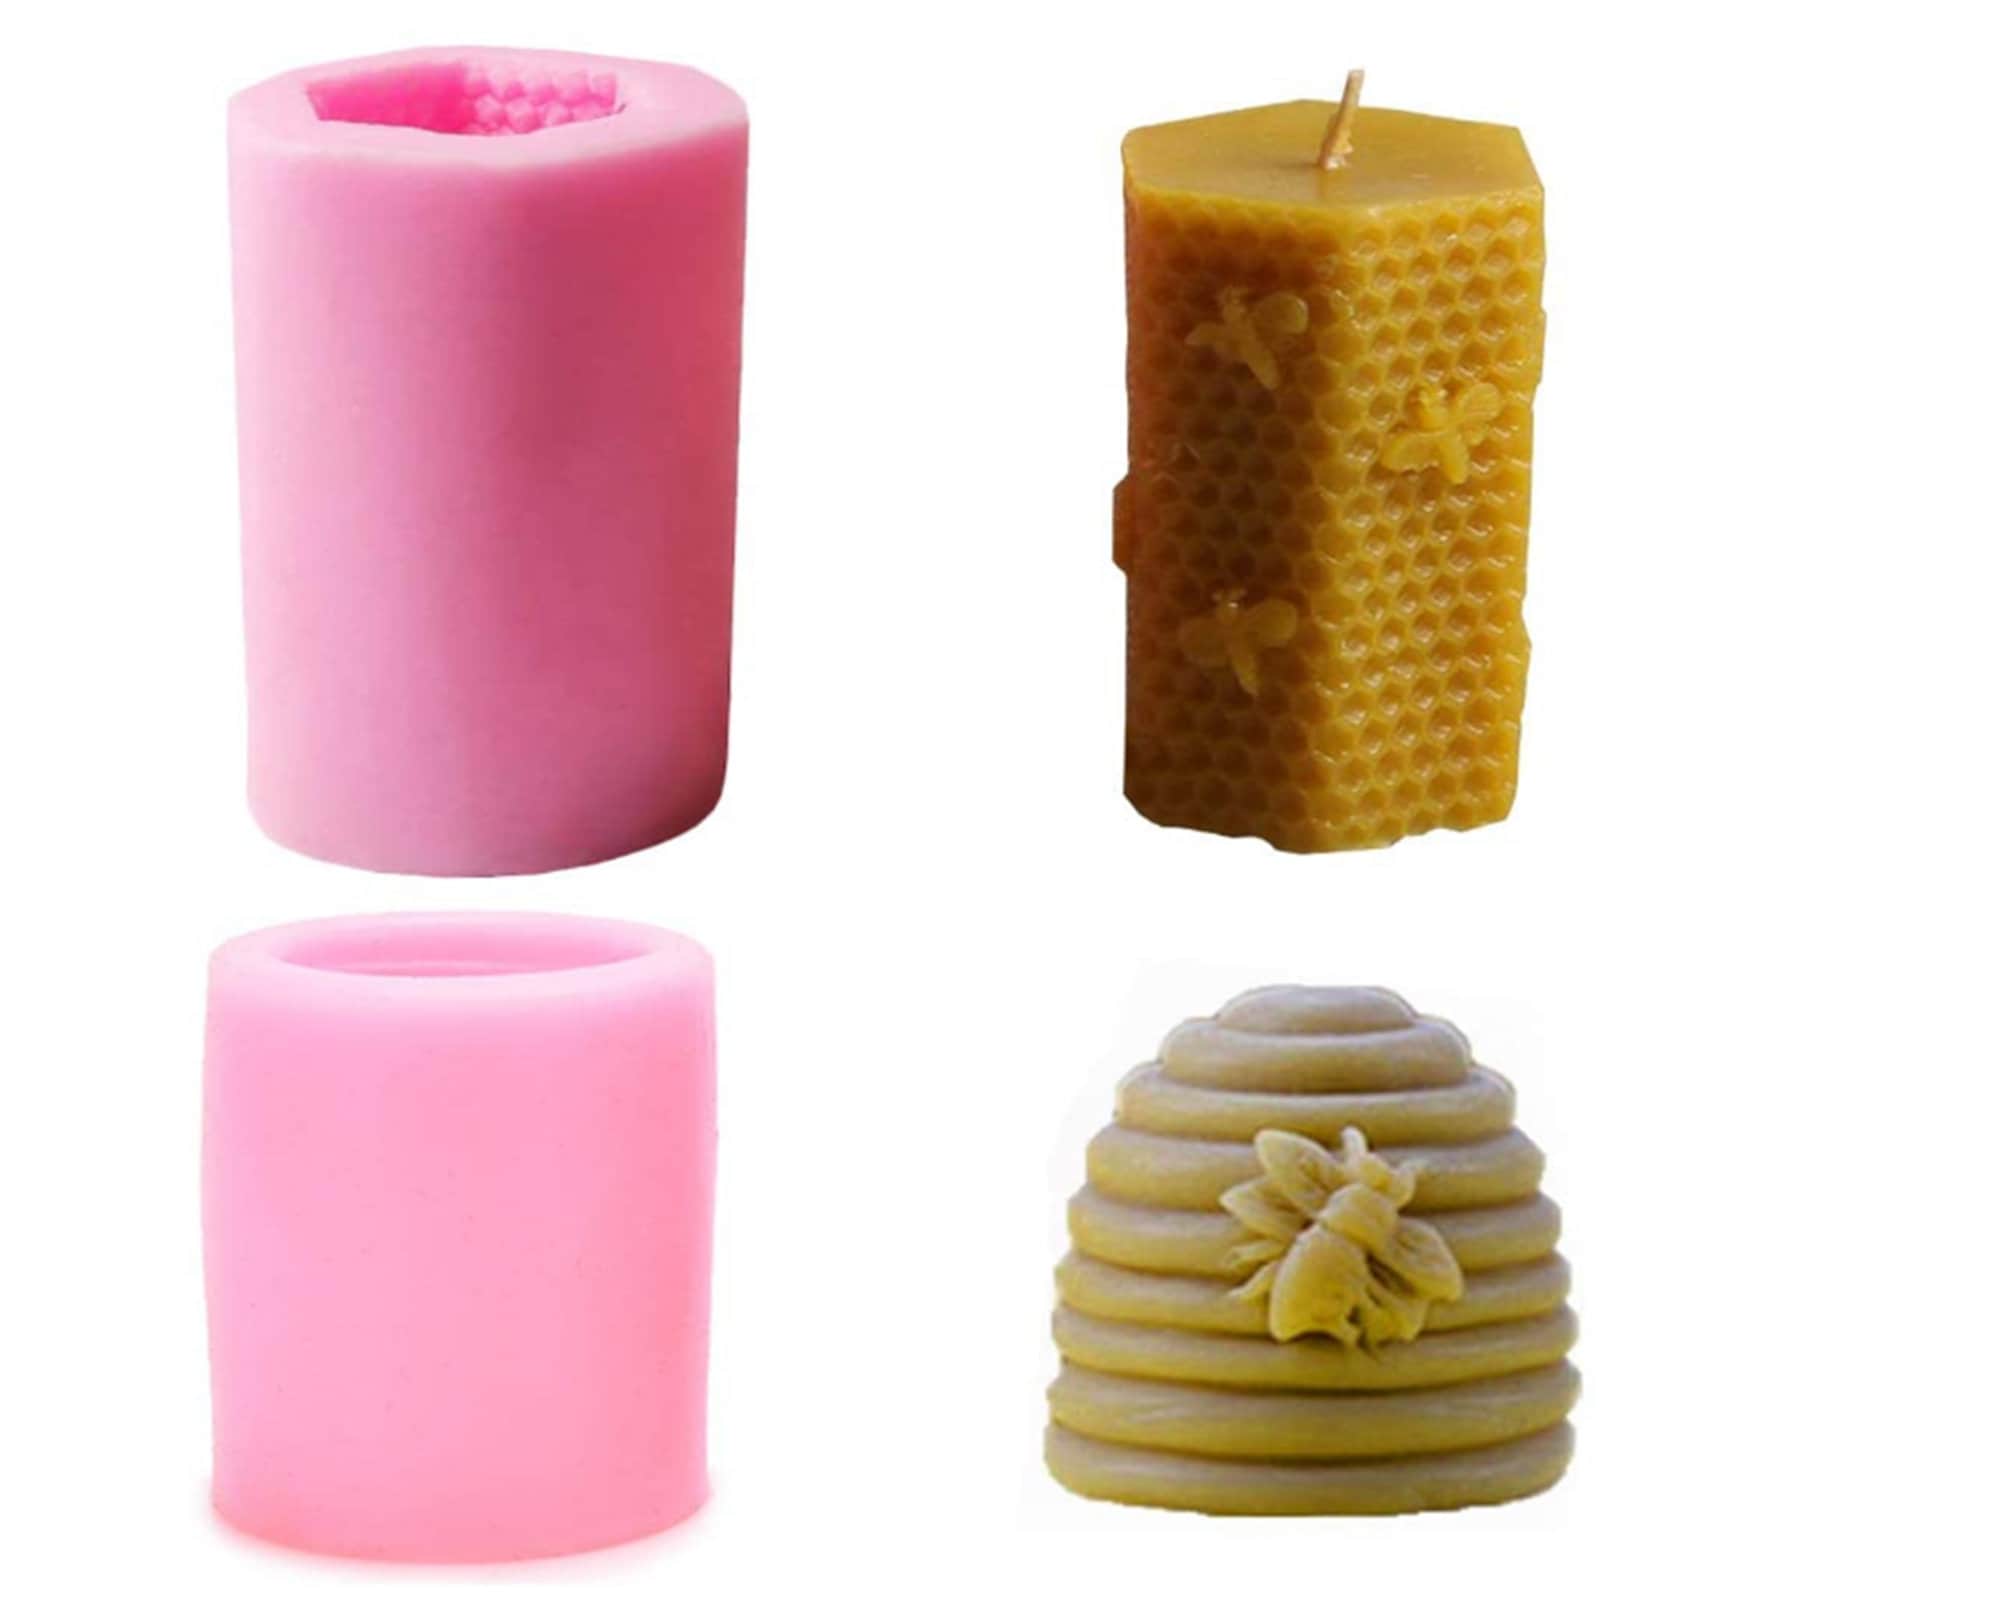 Large Honeycomb Silicone Soap Wax Mold